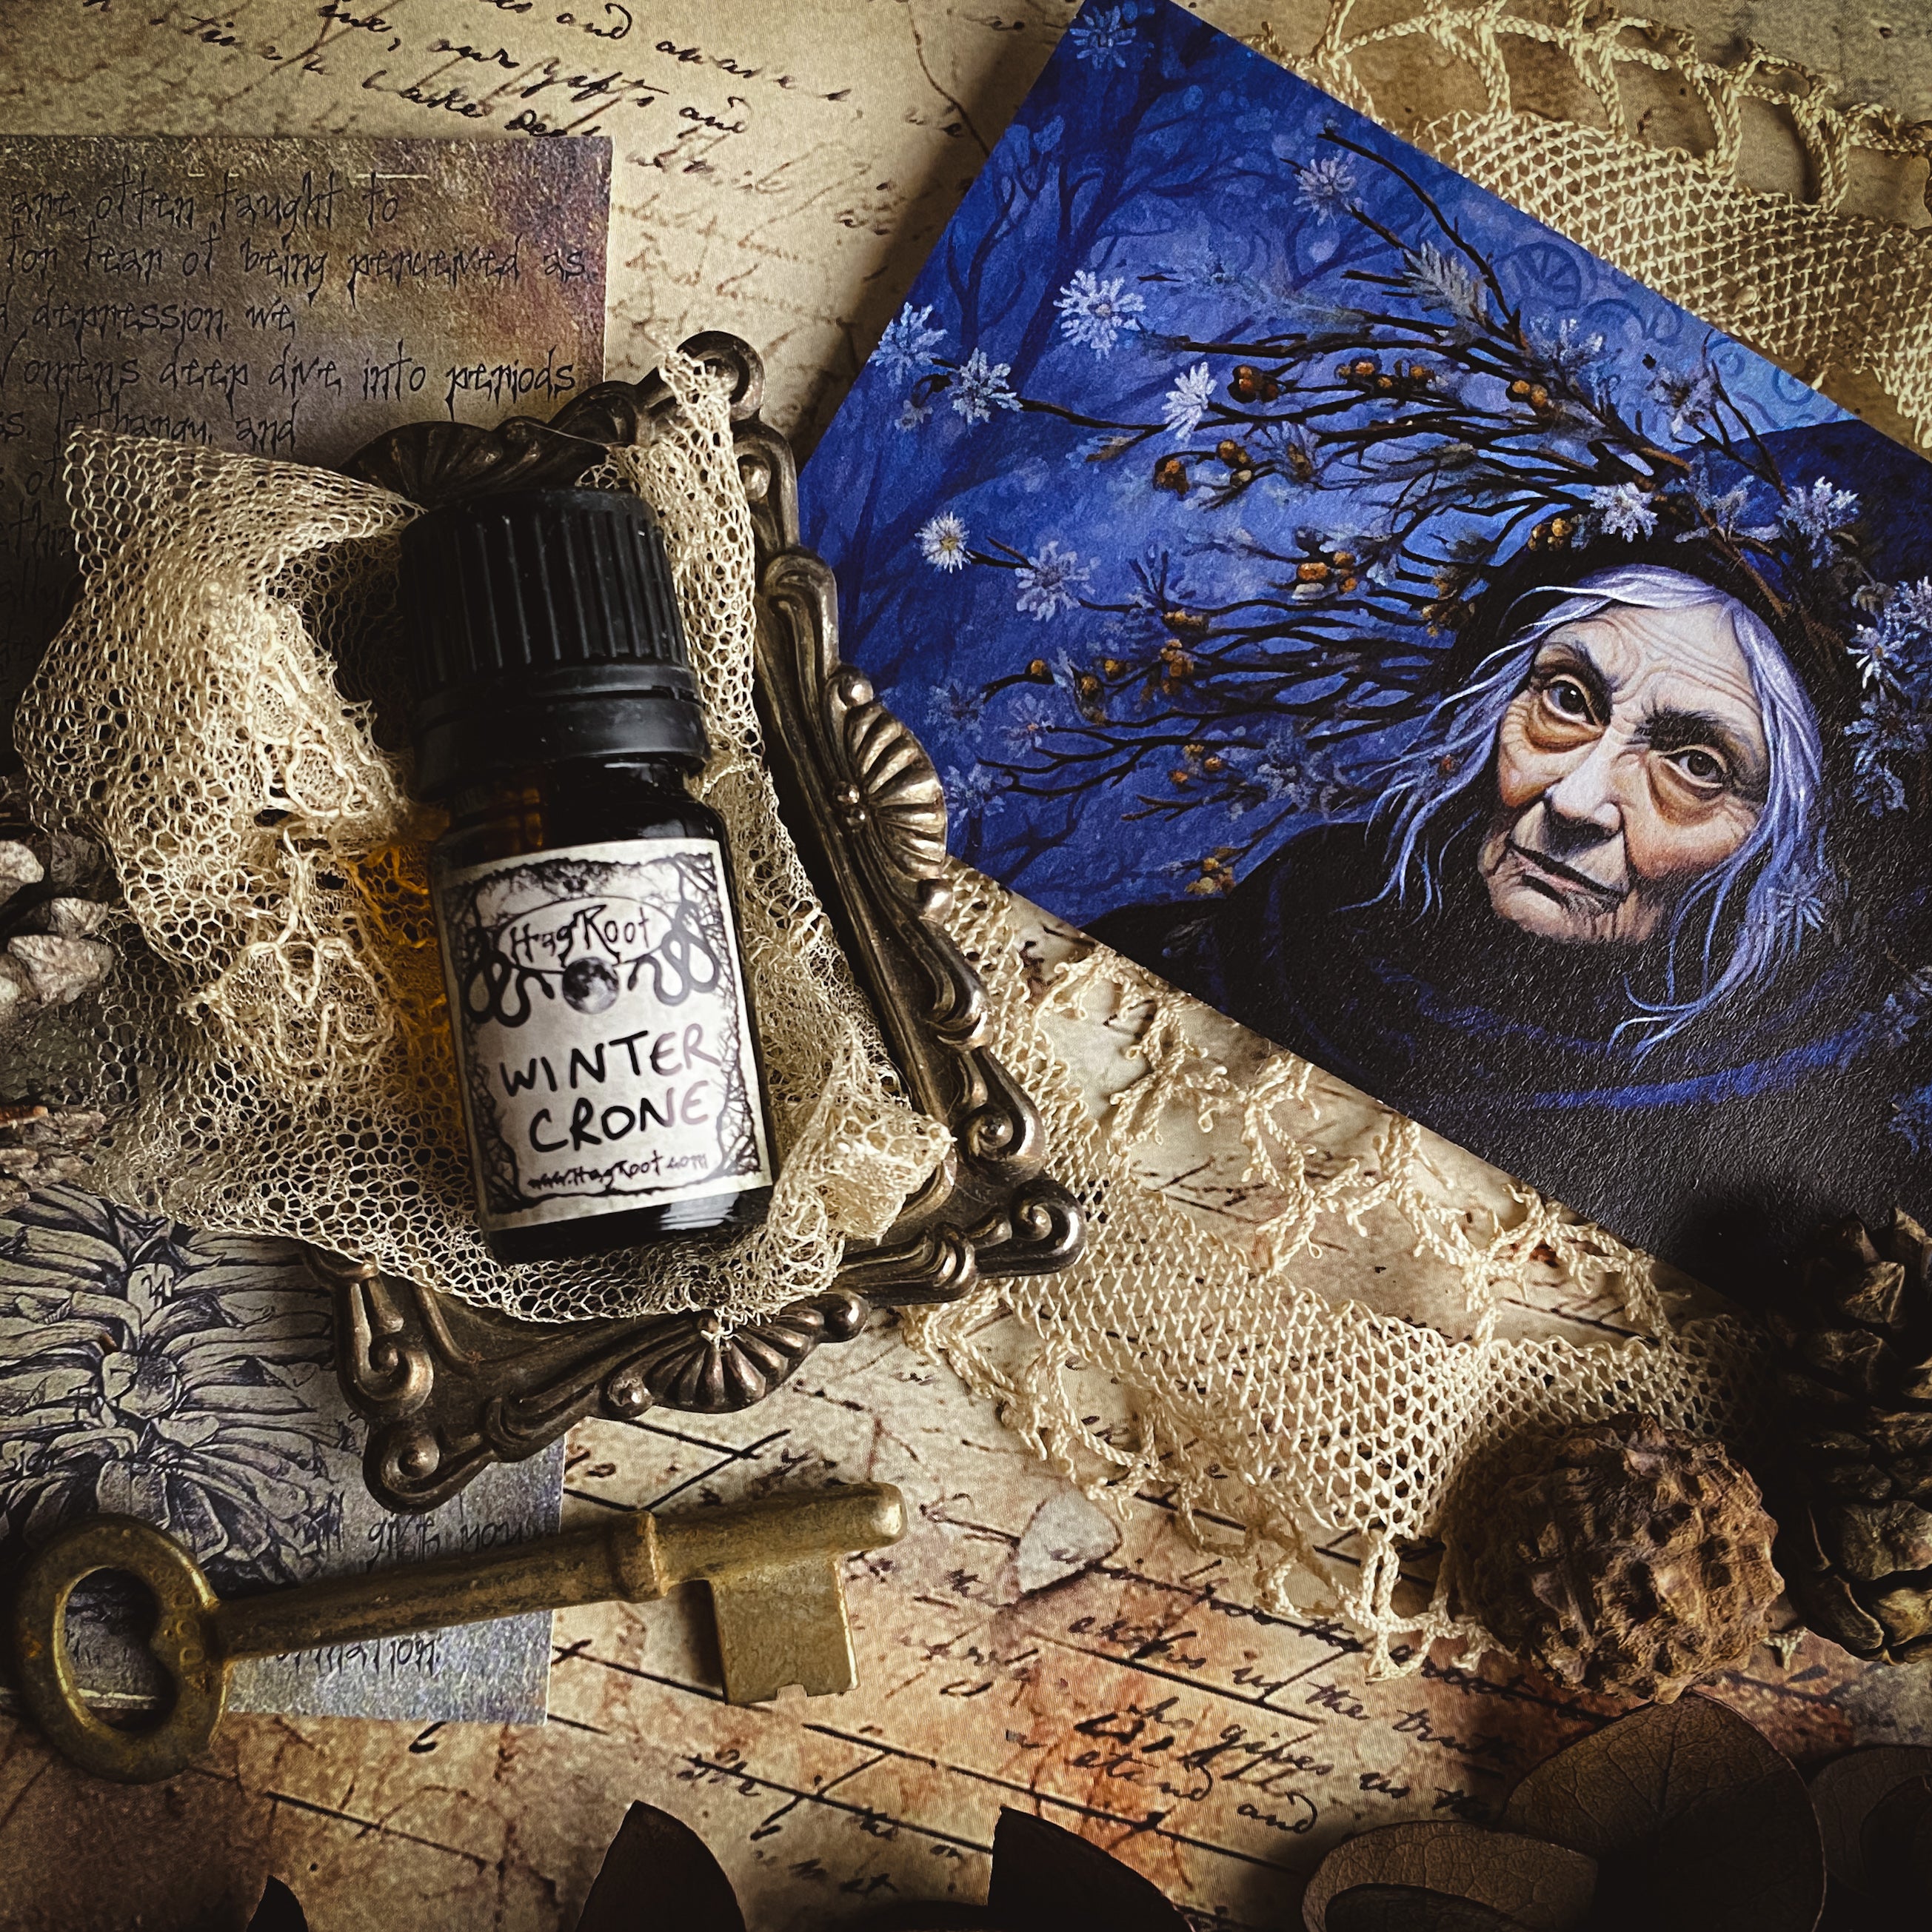 WINTER CRONE-(Snow Covered Evergreen Forests, Enchanting, Vanilla, Ceremonial Fire, Dark Spices)-Perfume, Cologne, Anointing, Ritual Oil